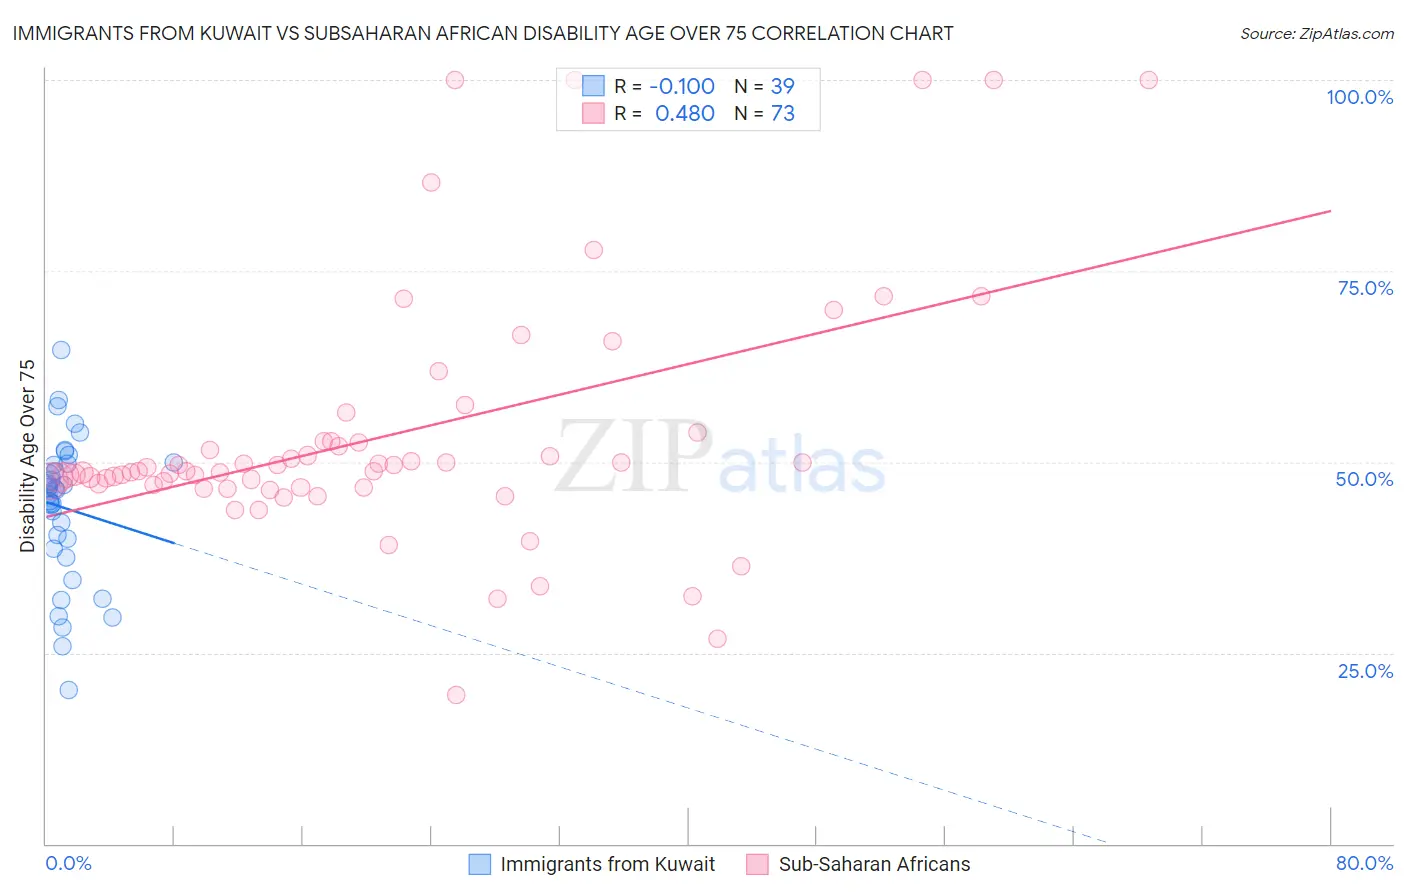 Immigrants from Kuwait vs Subsaharan African Disability Age Over 75